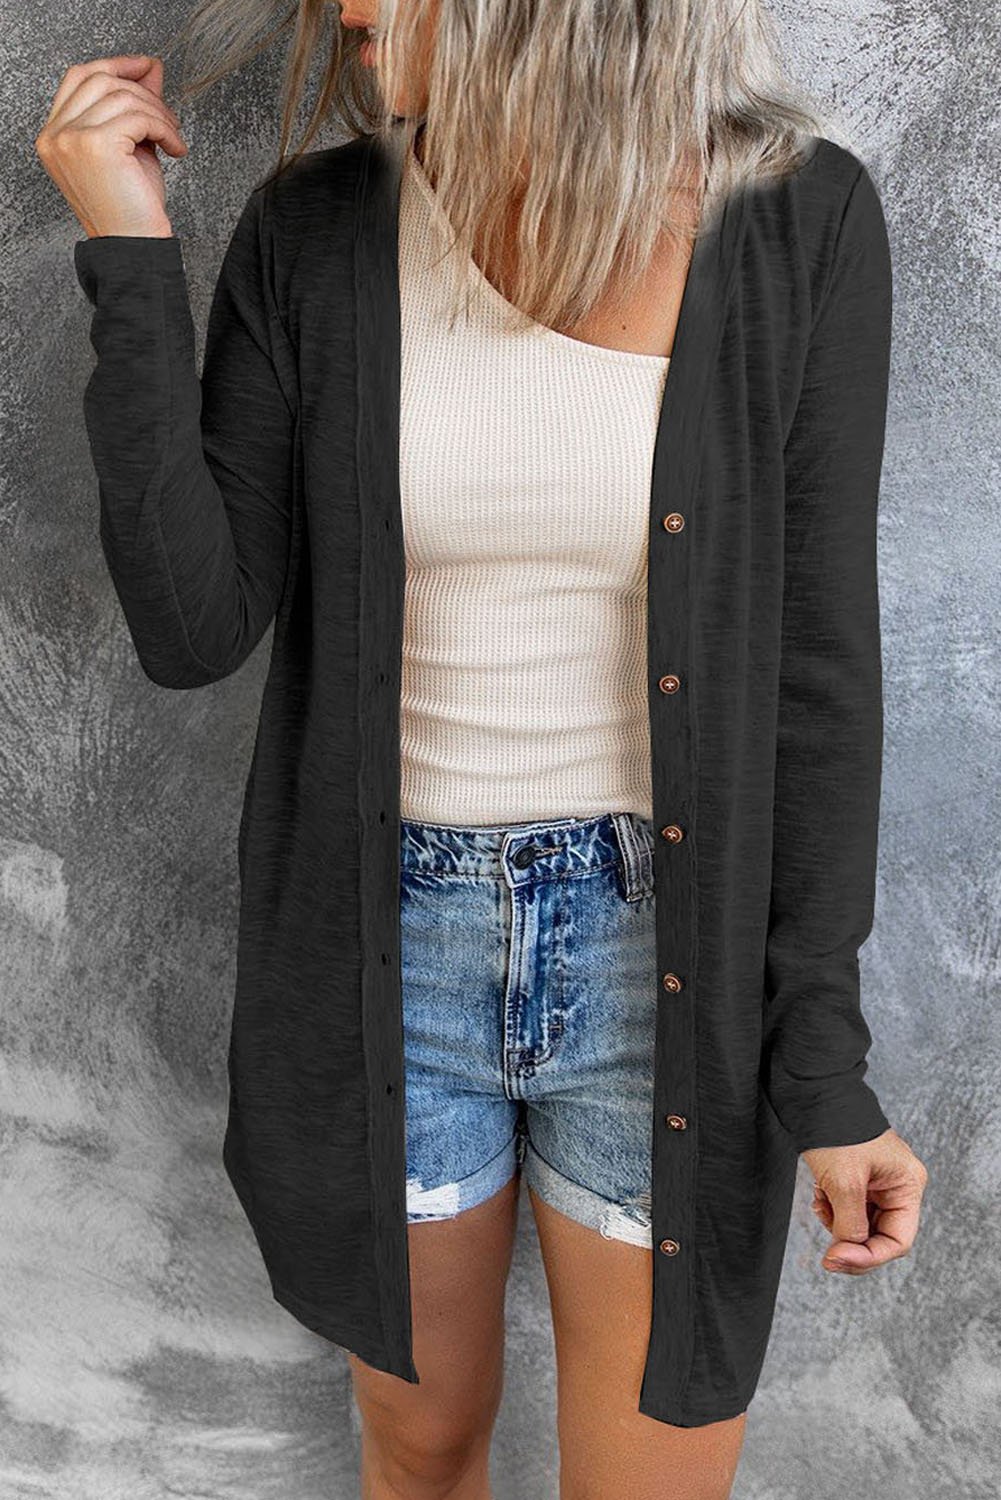 Lightweight Black Solid Color Open-Front Buttons Cardigan